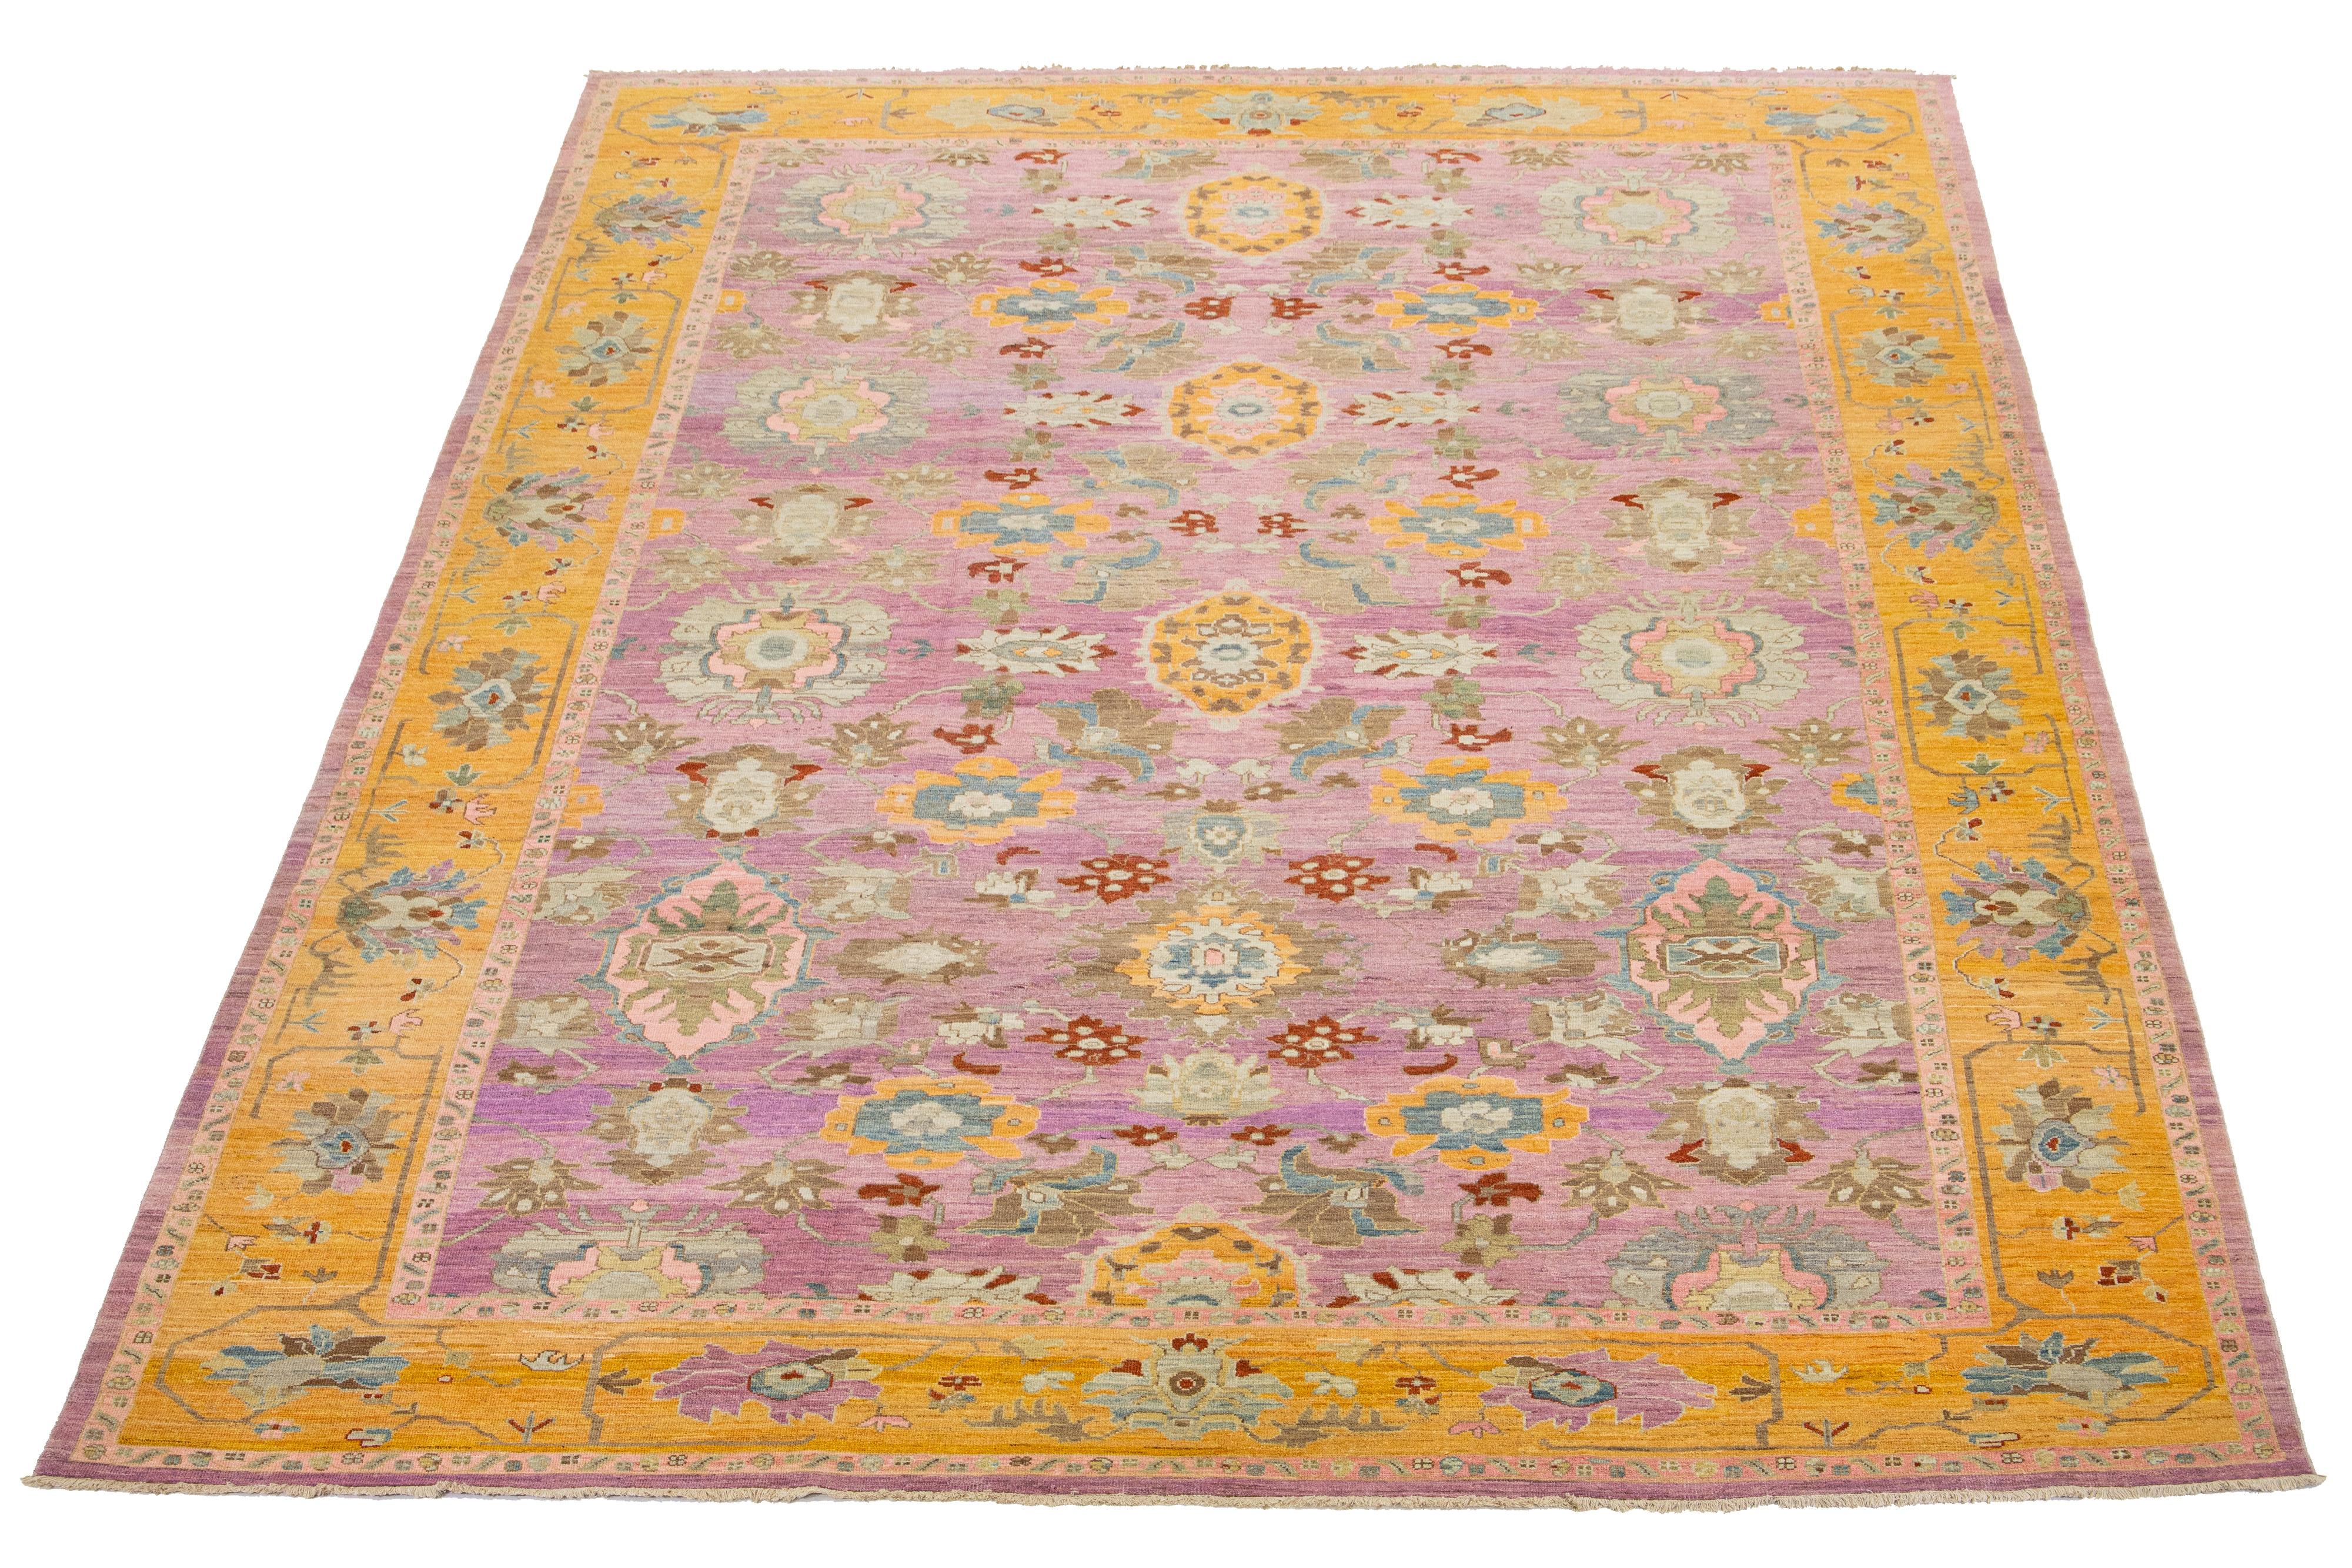 This wool rug exhibits a modern aesthetic with its Oushak-style design. It features a hand-knotted pink field and a yellow border adorned with vibrant floral patterns that extend throughout the entire rug.

This rug measures 12'1